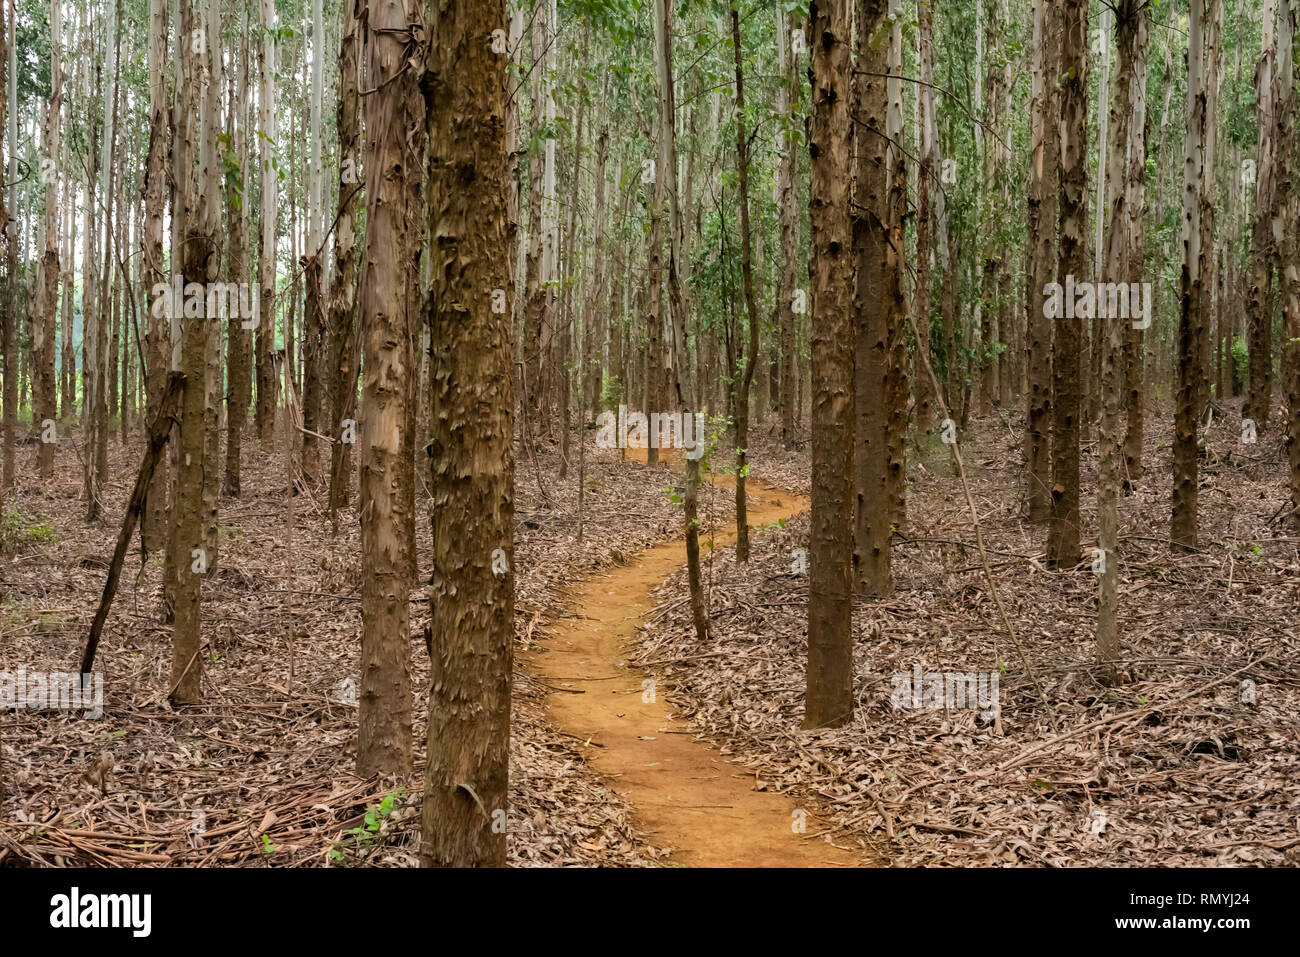 A trail curves through a plantation of young Eucalyptus trees in Kwa-zulu Natal, South Africa. Stock Photo